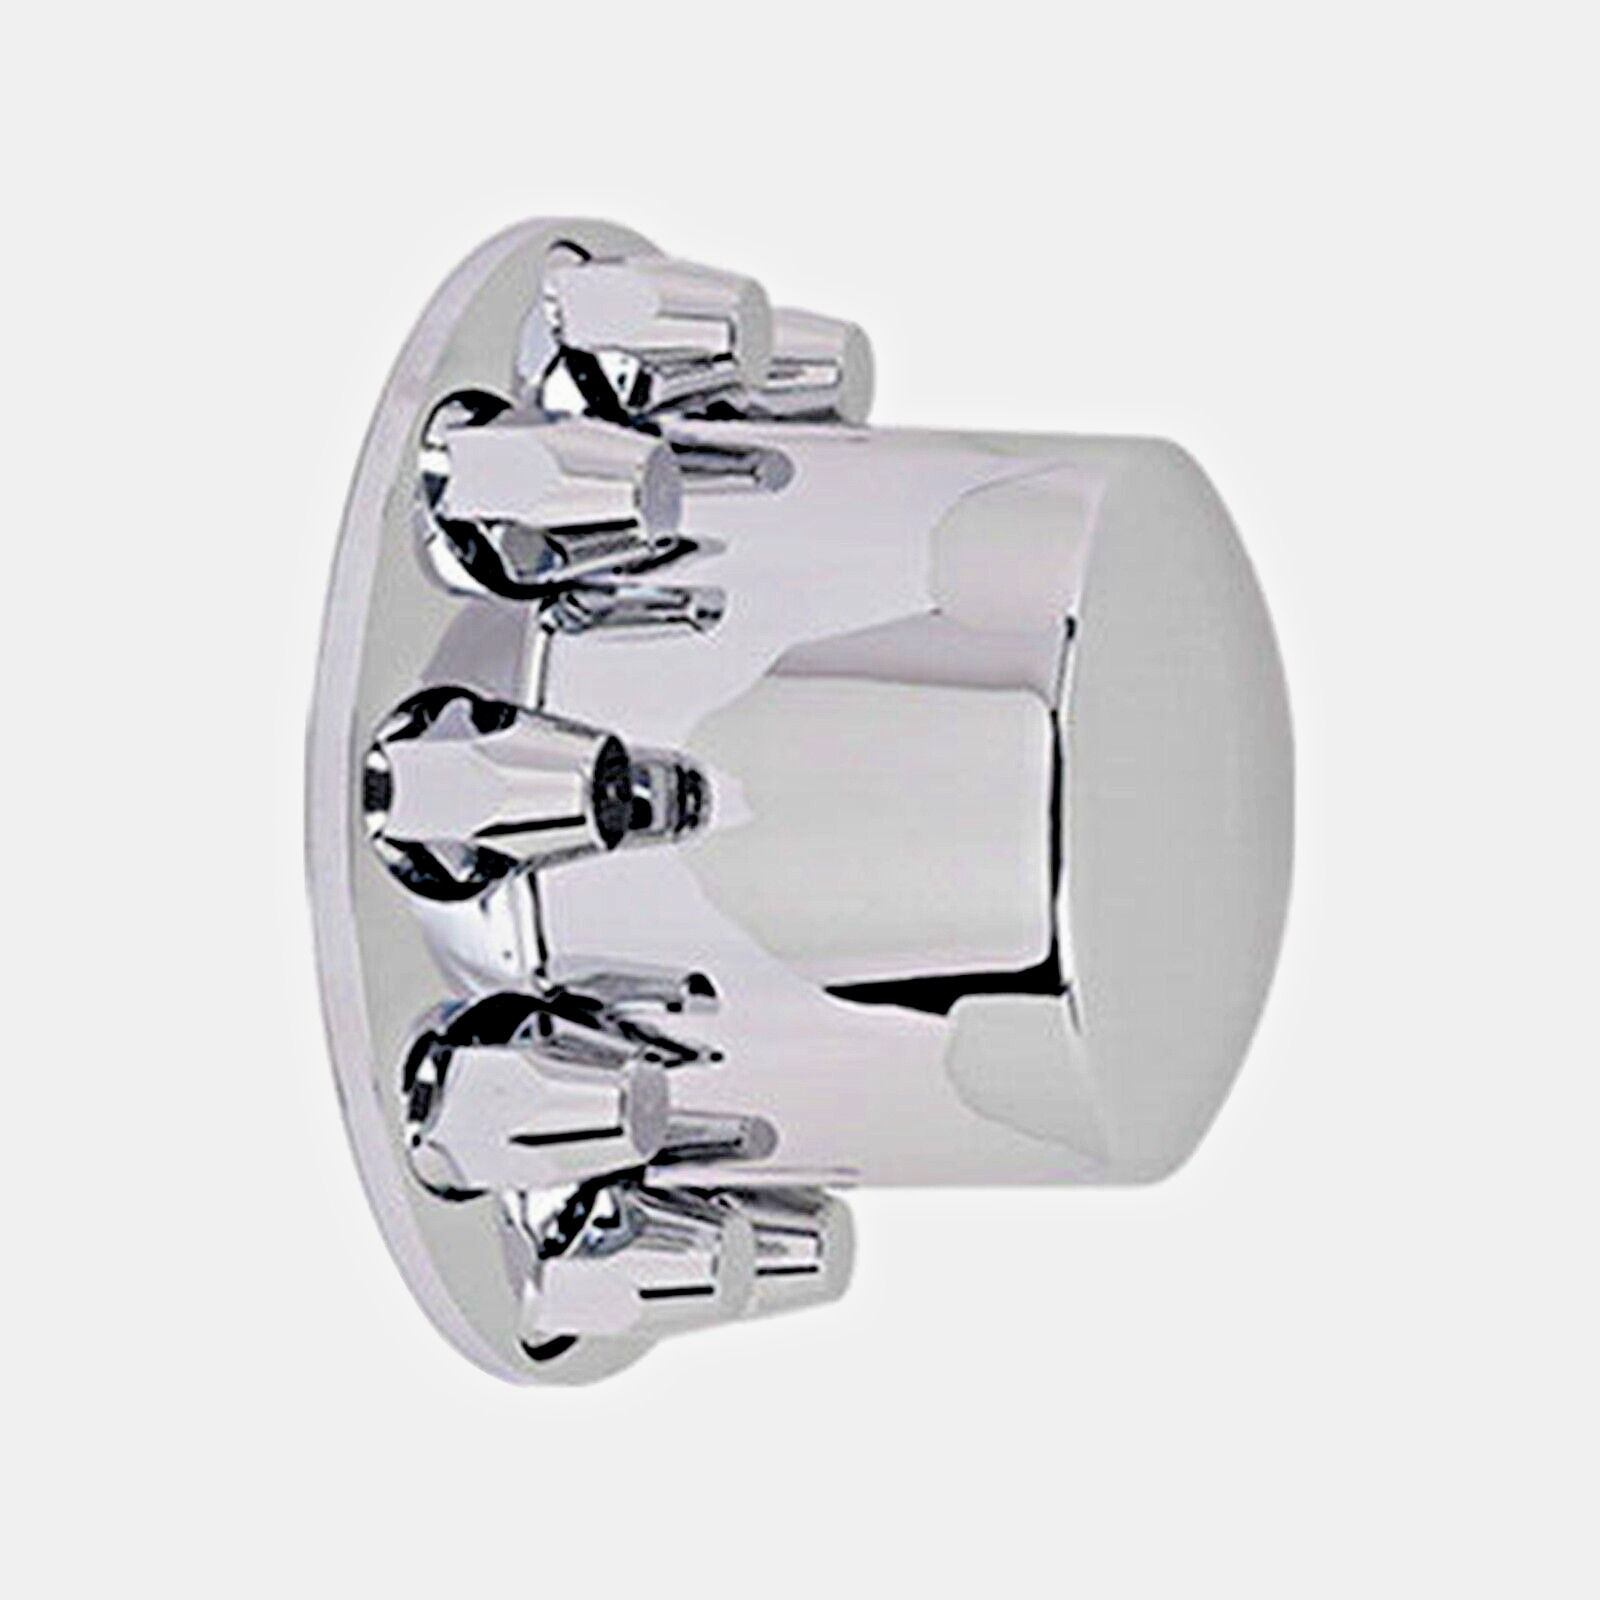 Chrome Rear Wheel Axle Cover Kits for Semi Truck with Hub Cap and Lug Nut Covers